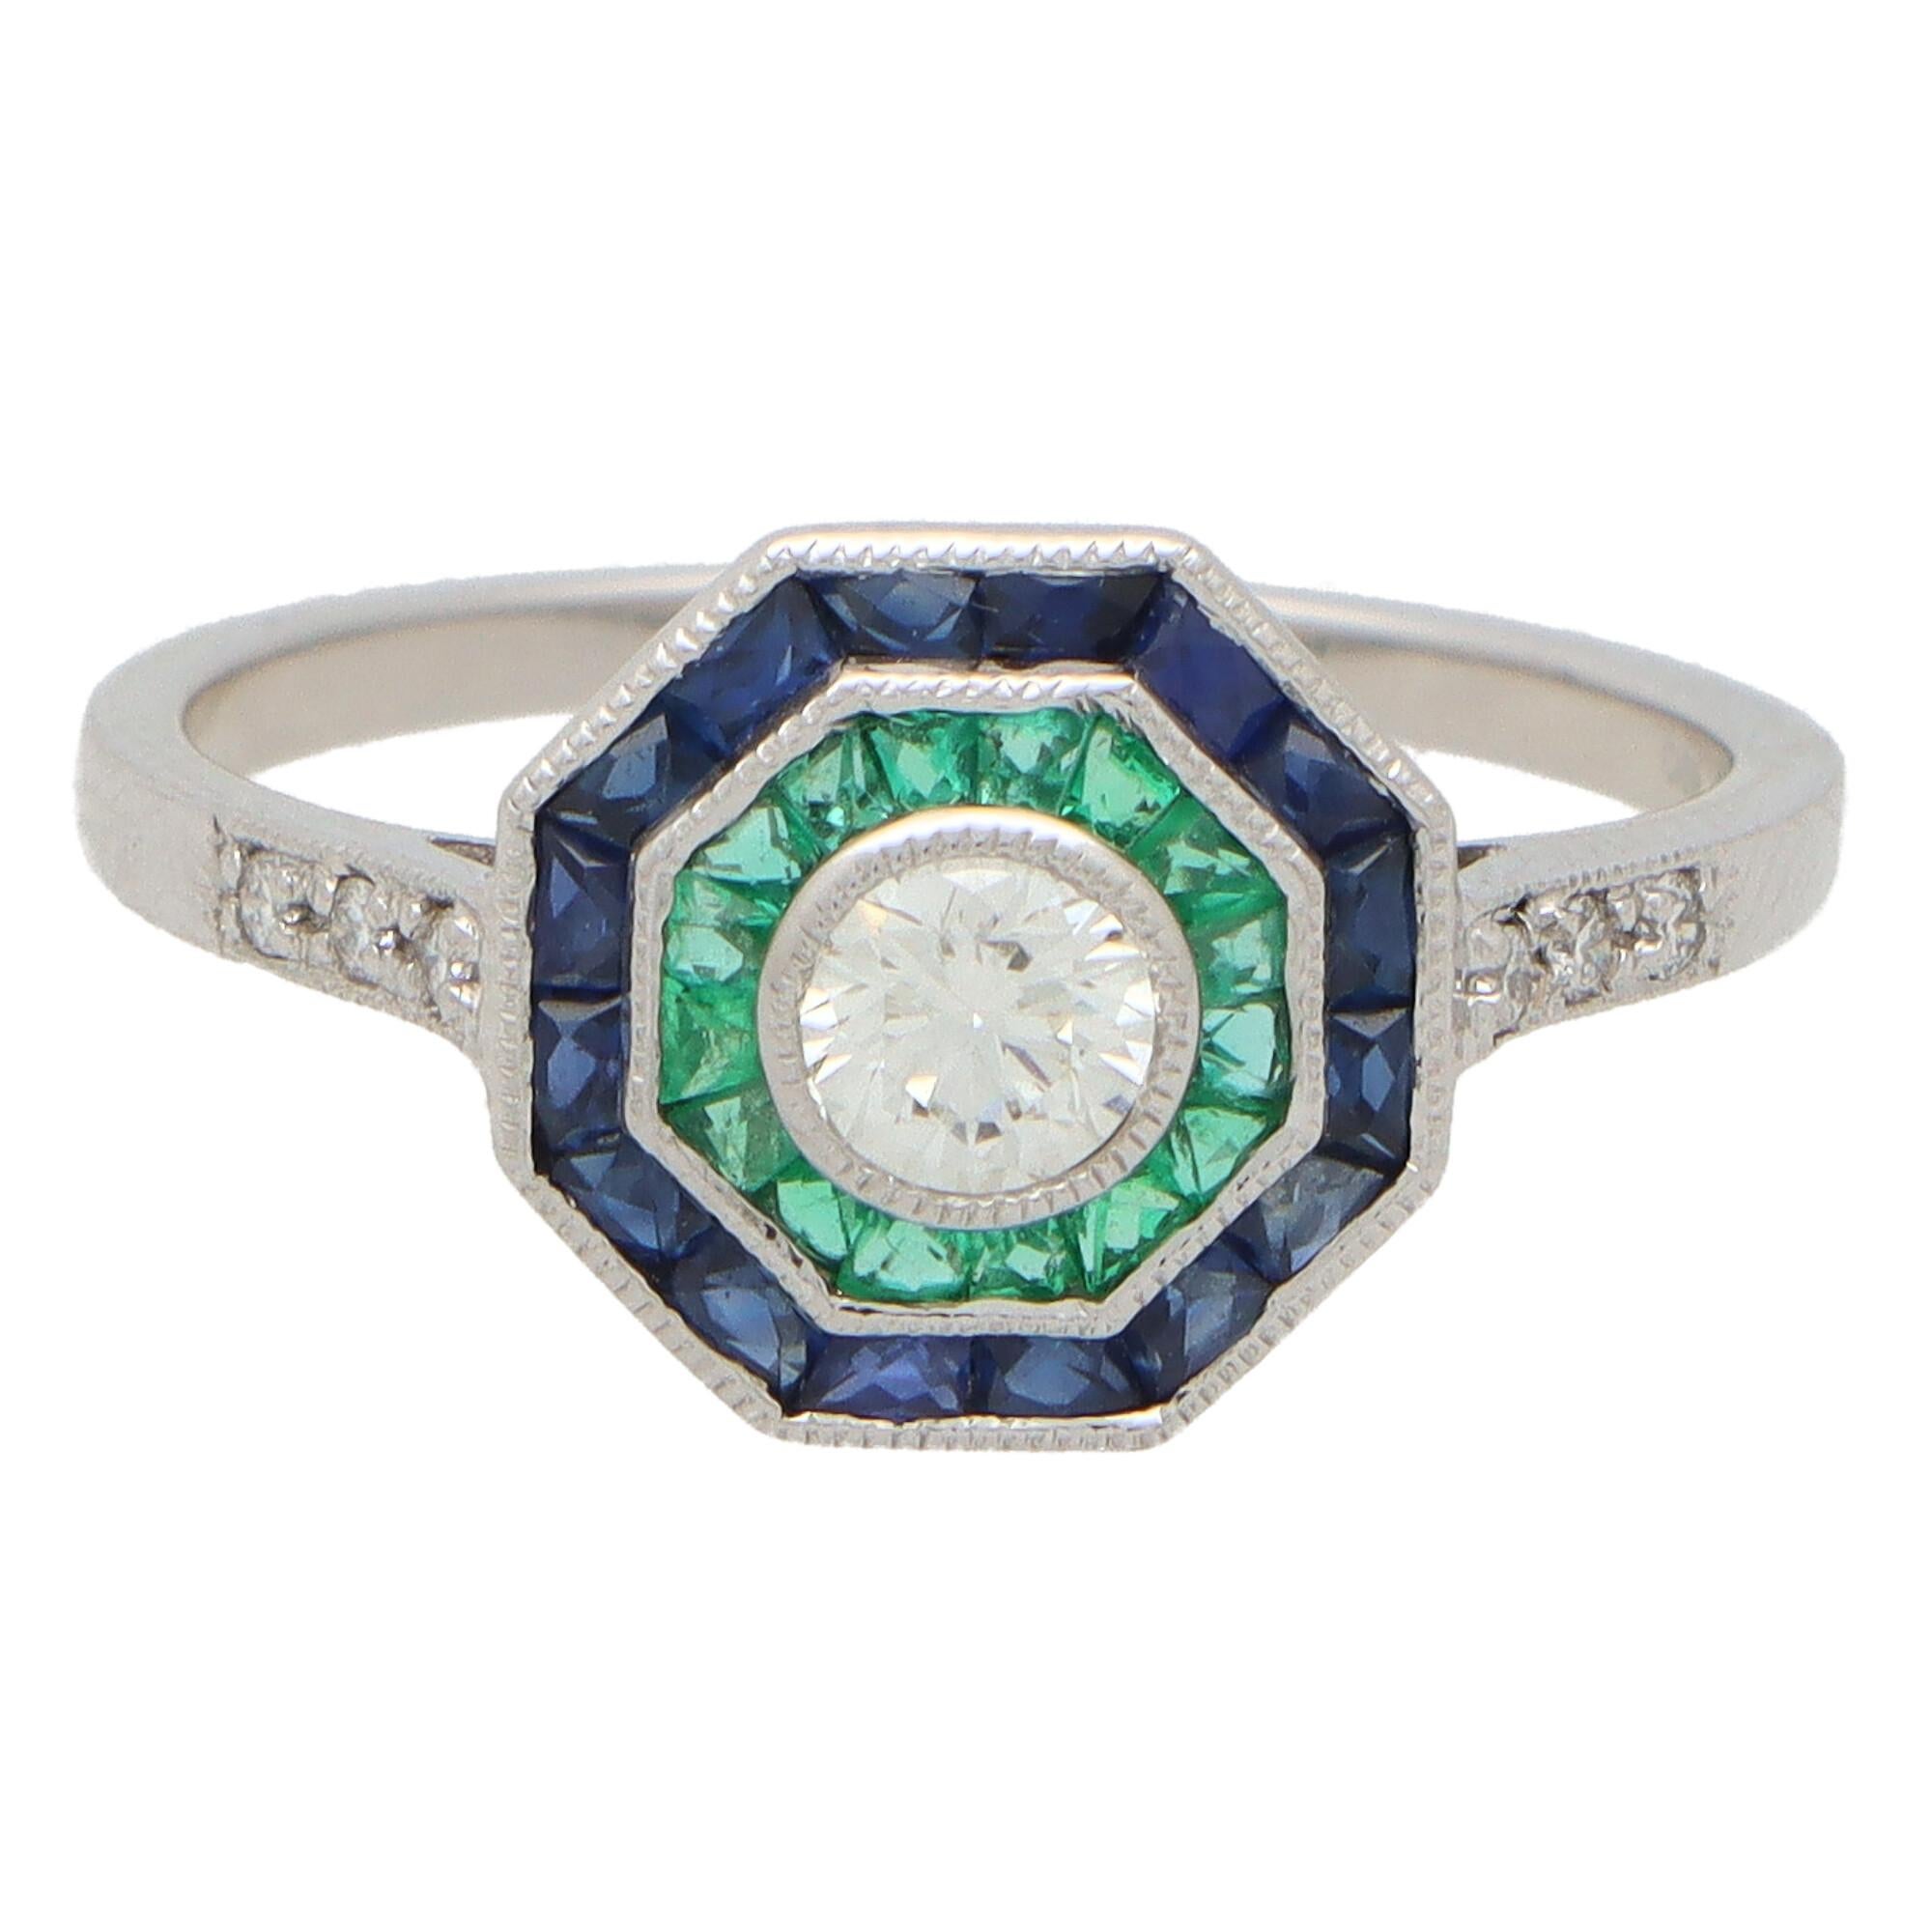 Women's or Men's Art Deco Inspired Octagonal Sapphire, Emerald and Diamond Cluster Ring in Gold